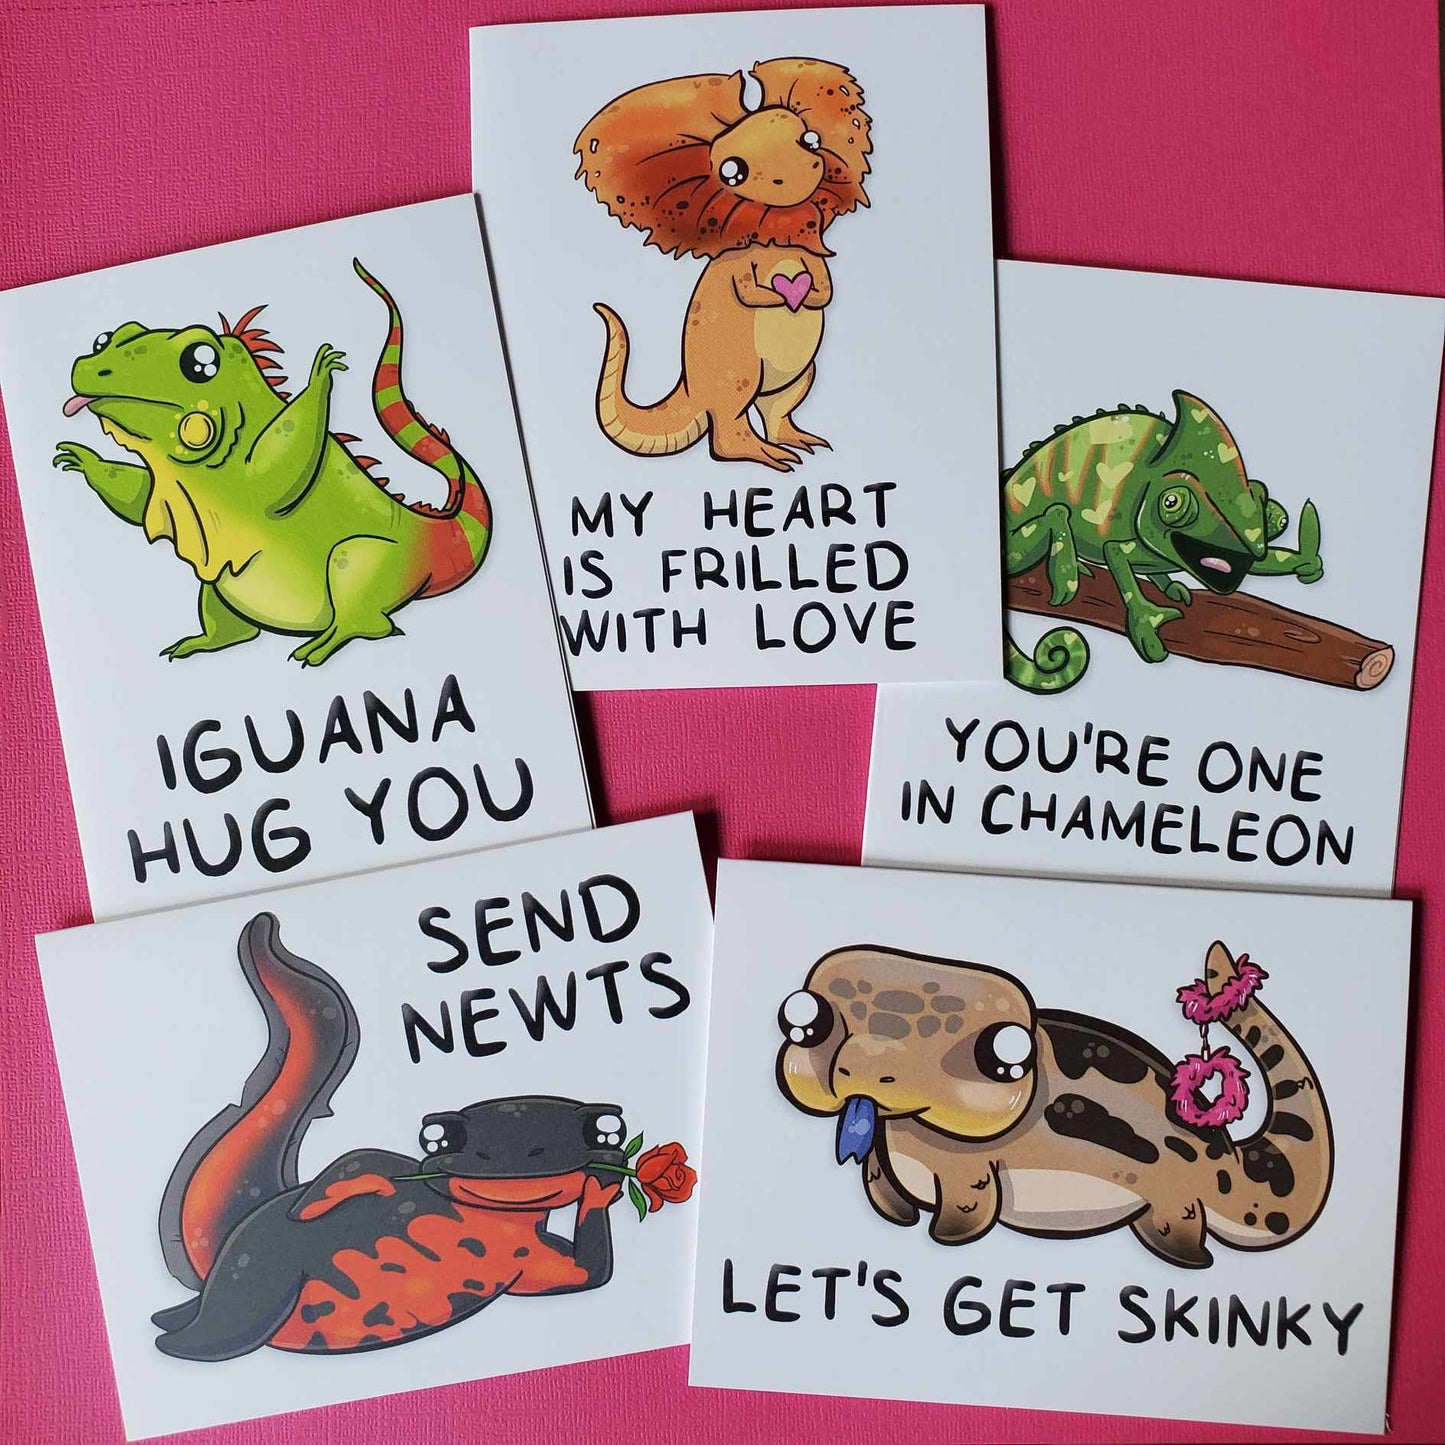 "You're One in Chameleon" Greeting Card